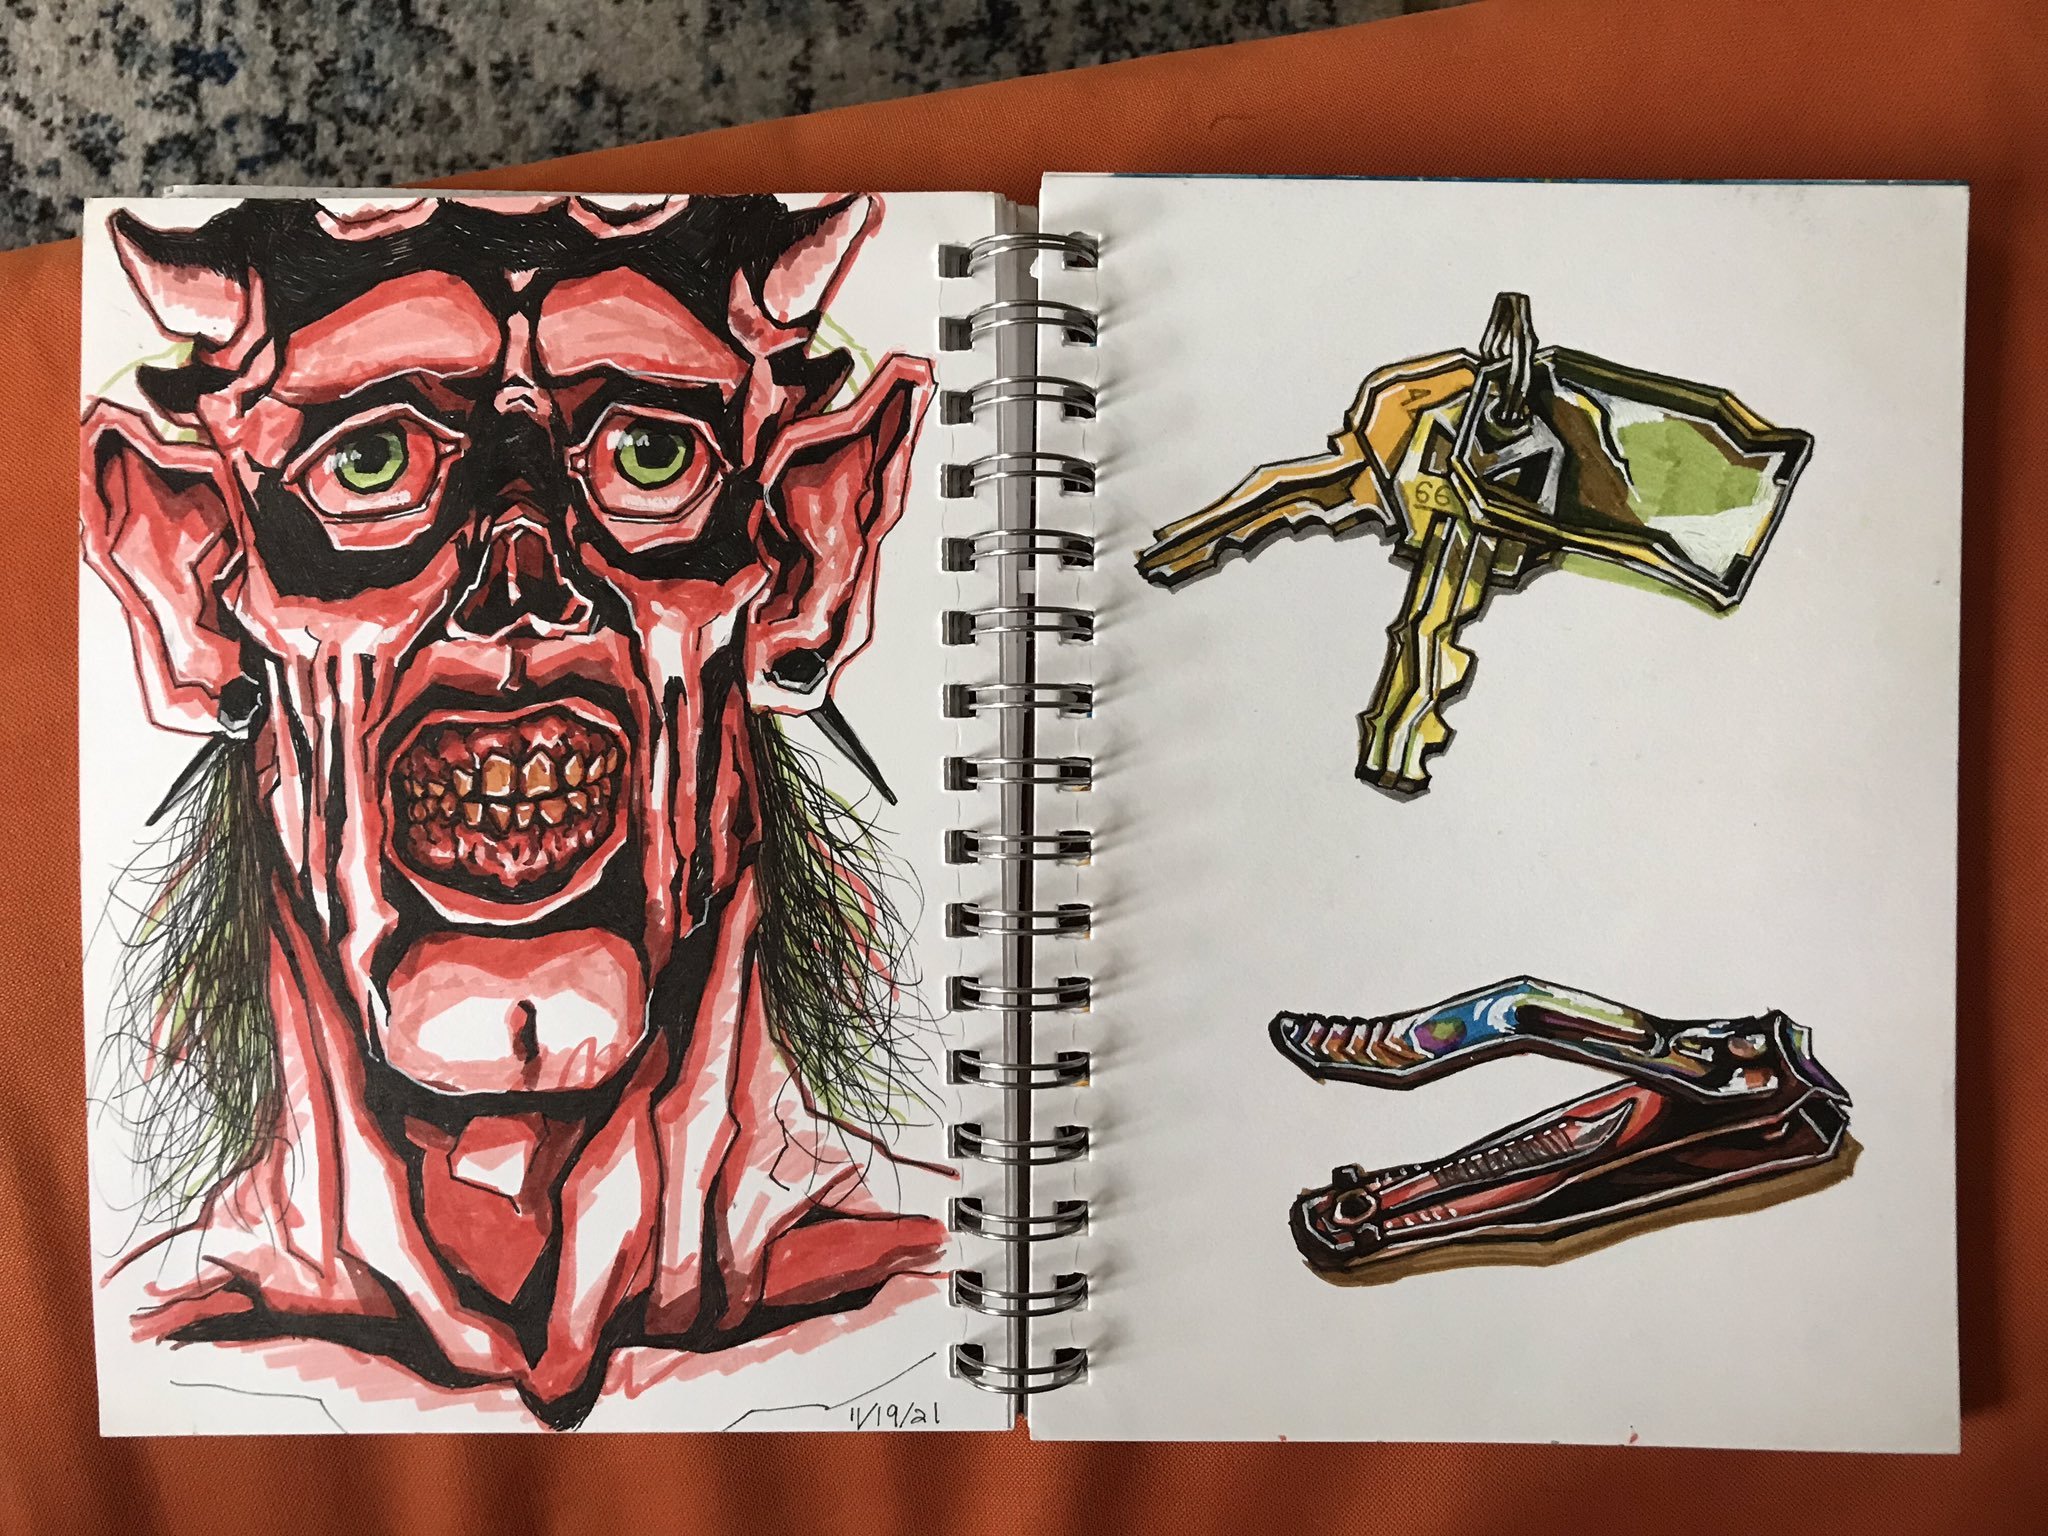 Photo of two sketchbook pages: one shows a red demon, the other shows drawings of keys and nail clippers